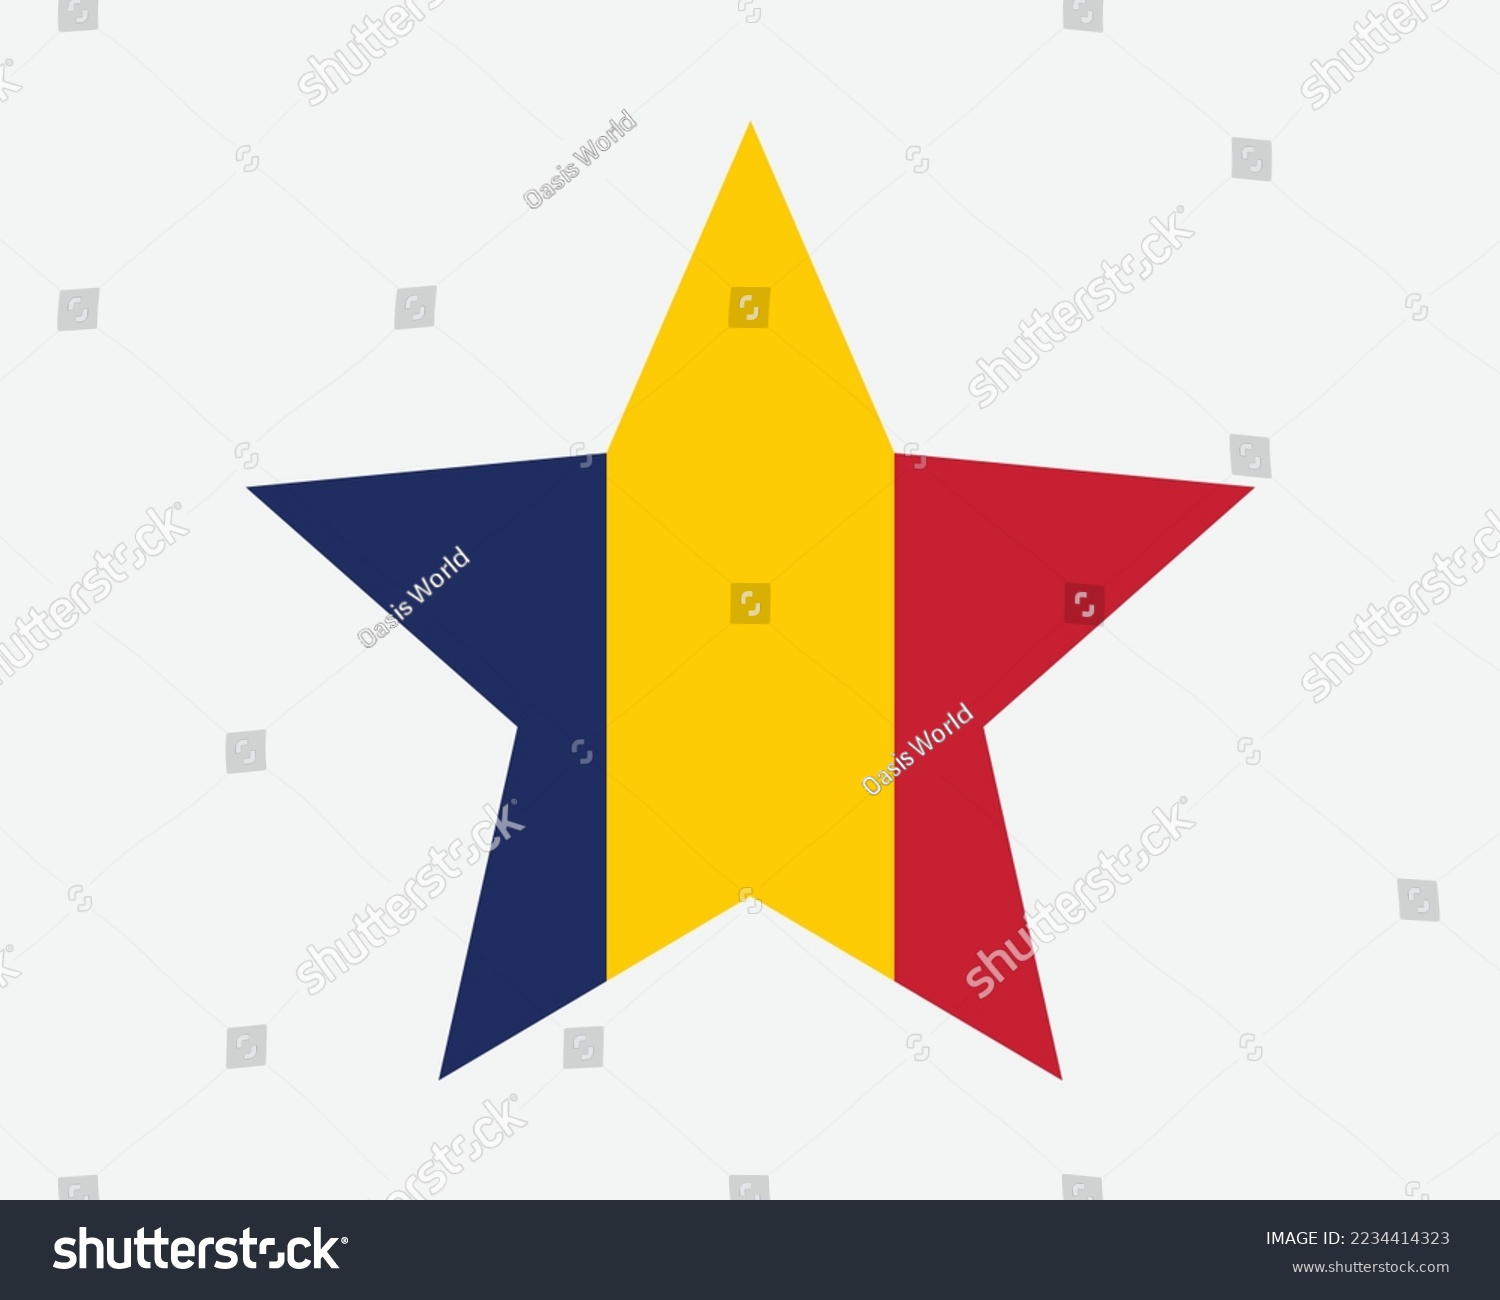 SVG of Chad Star Flag. Chadian Star Shape Flag. Country National Banner Icon Symbol Vector 2D Flat Artwork Graphic Illustration svg